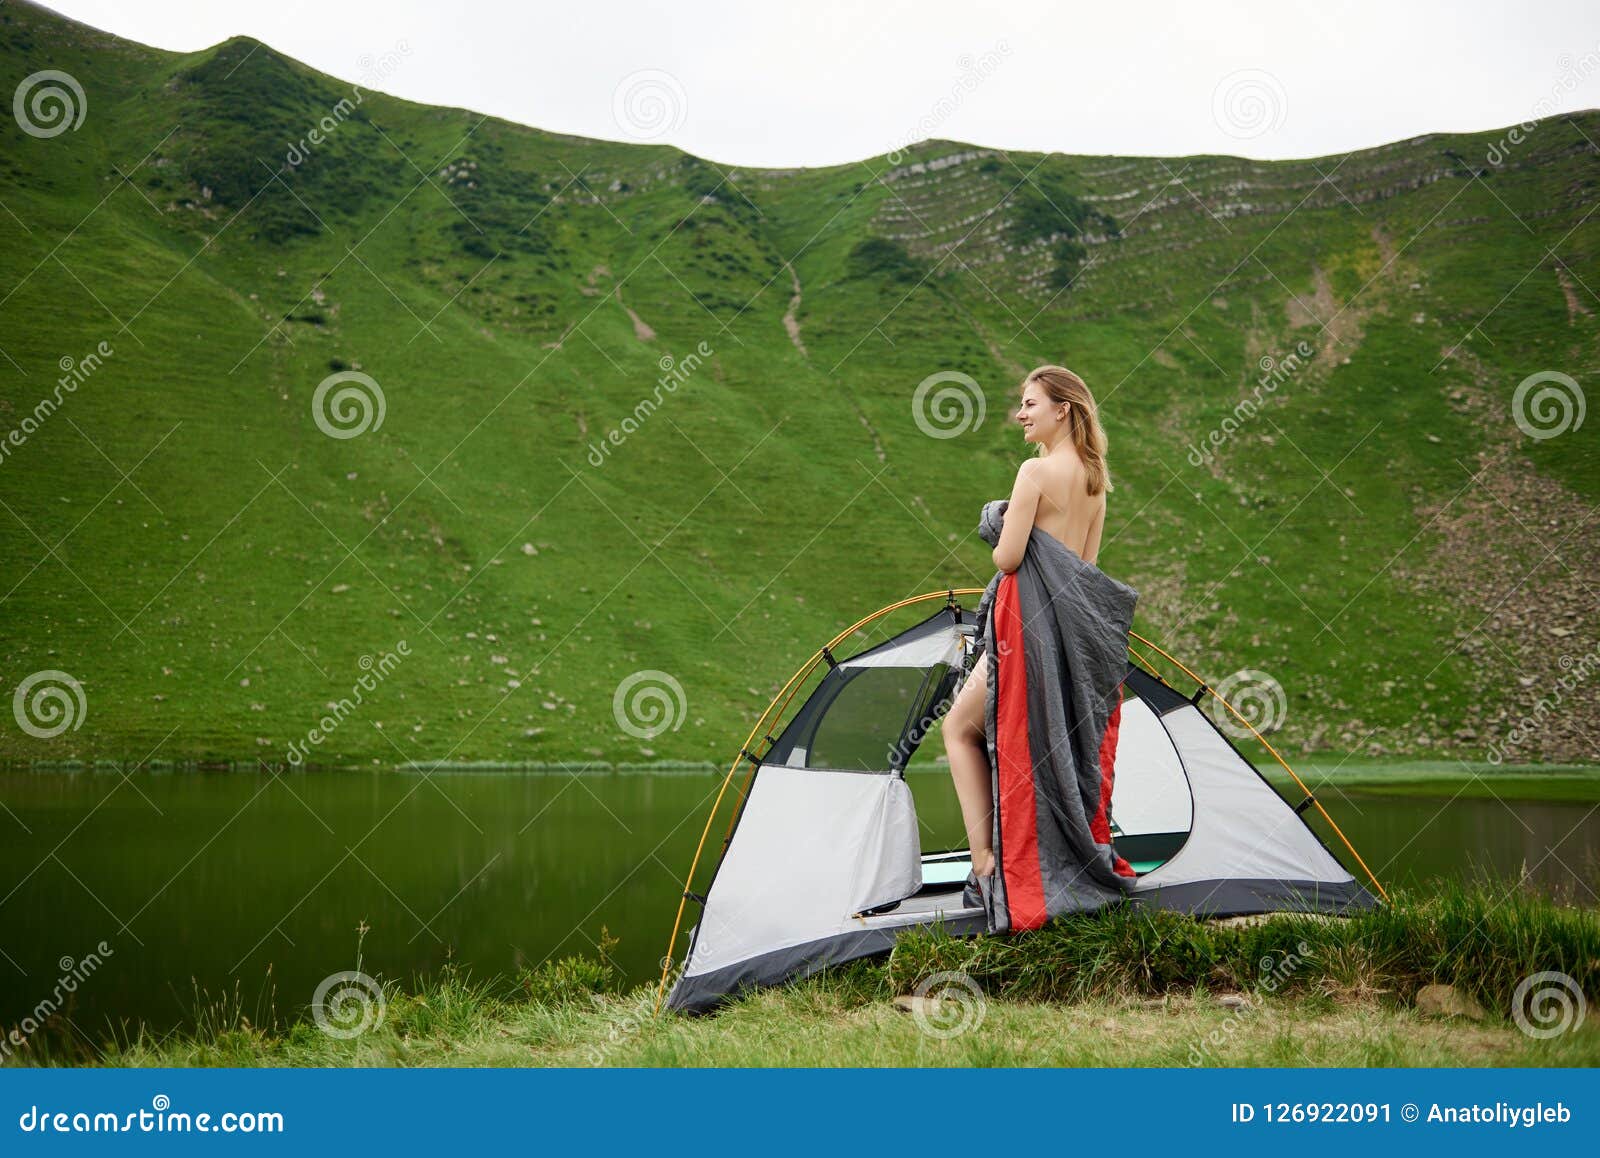 Attractive Naked Woman in Camping Stock Image